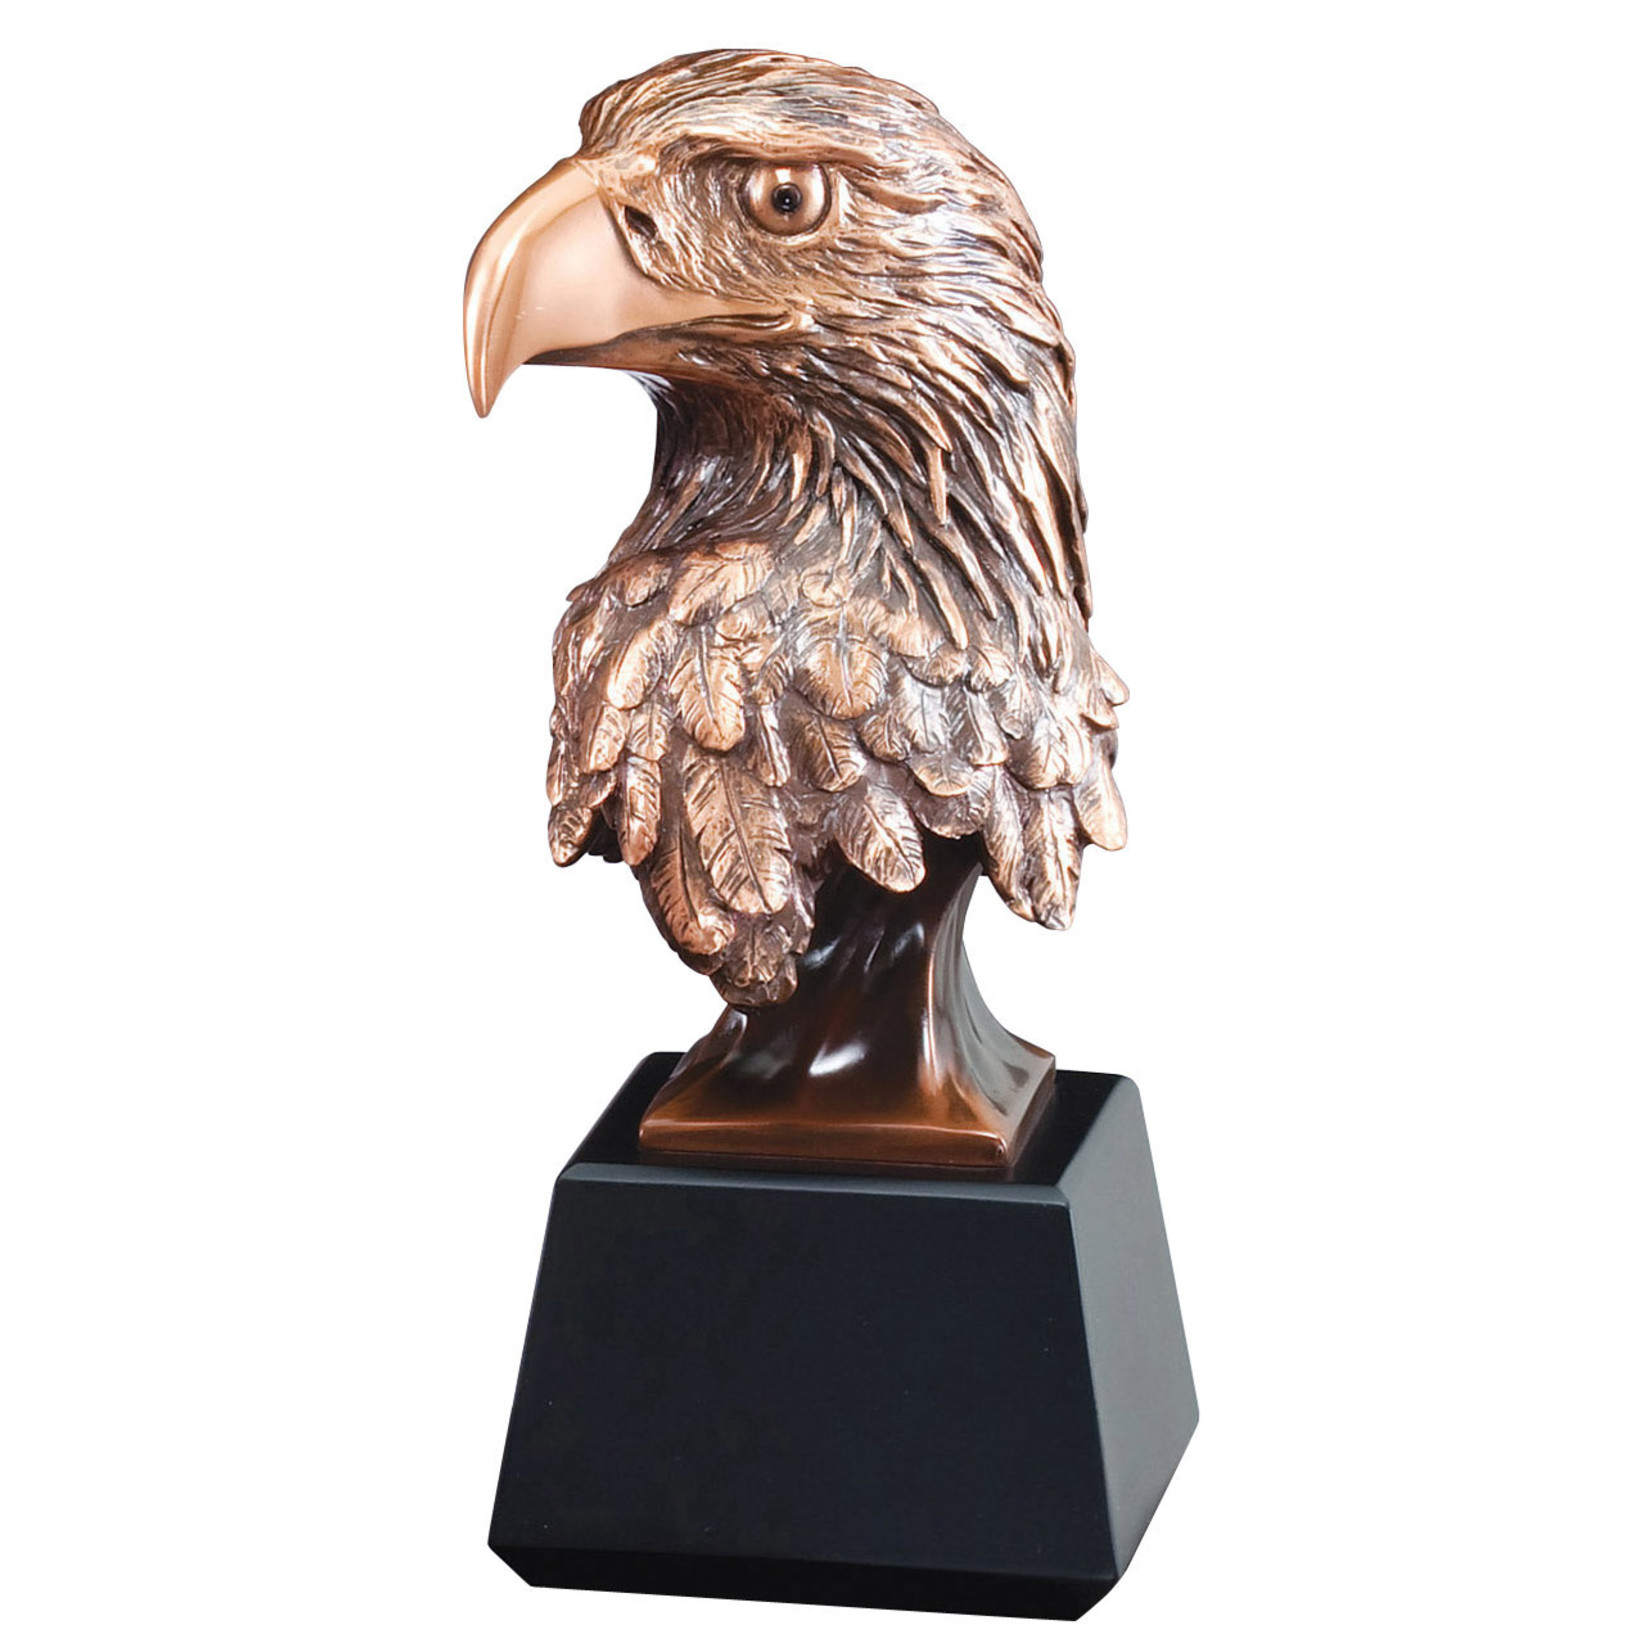 Marco 10" Eagle Bust on Black Base includes engraving